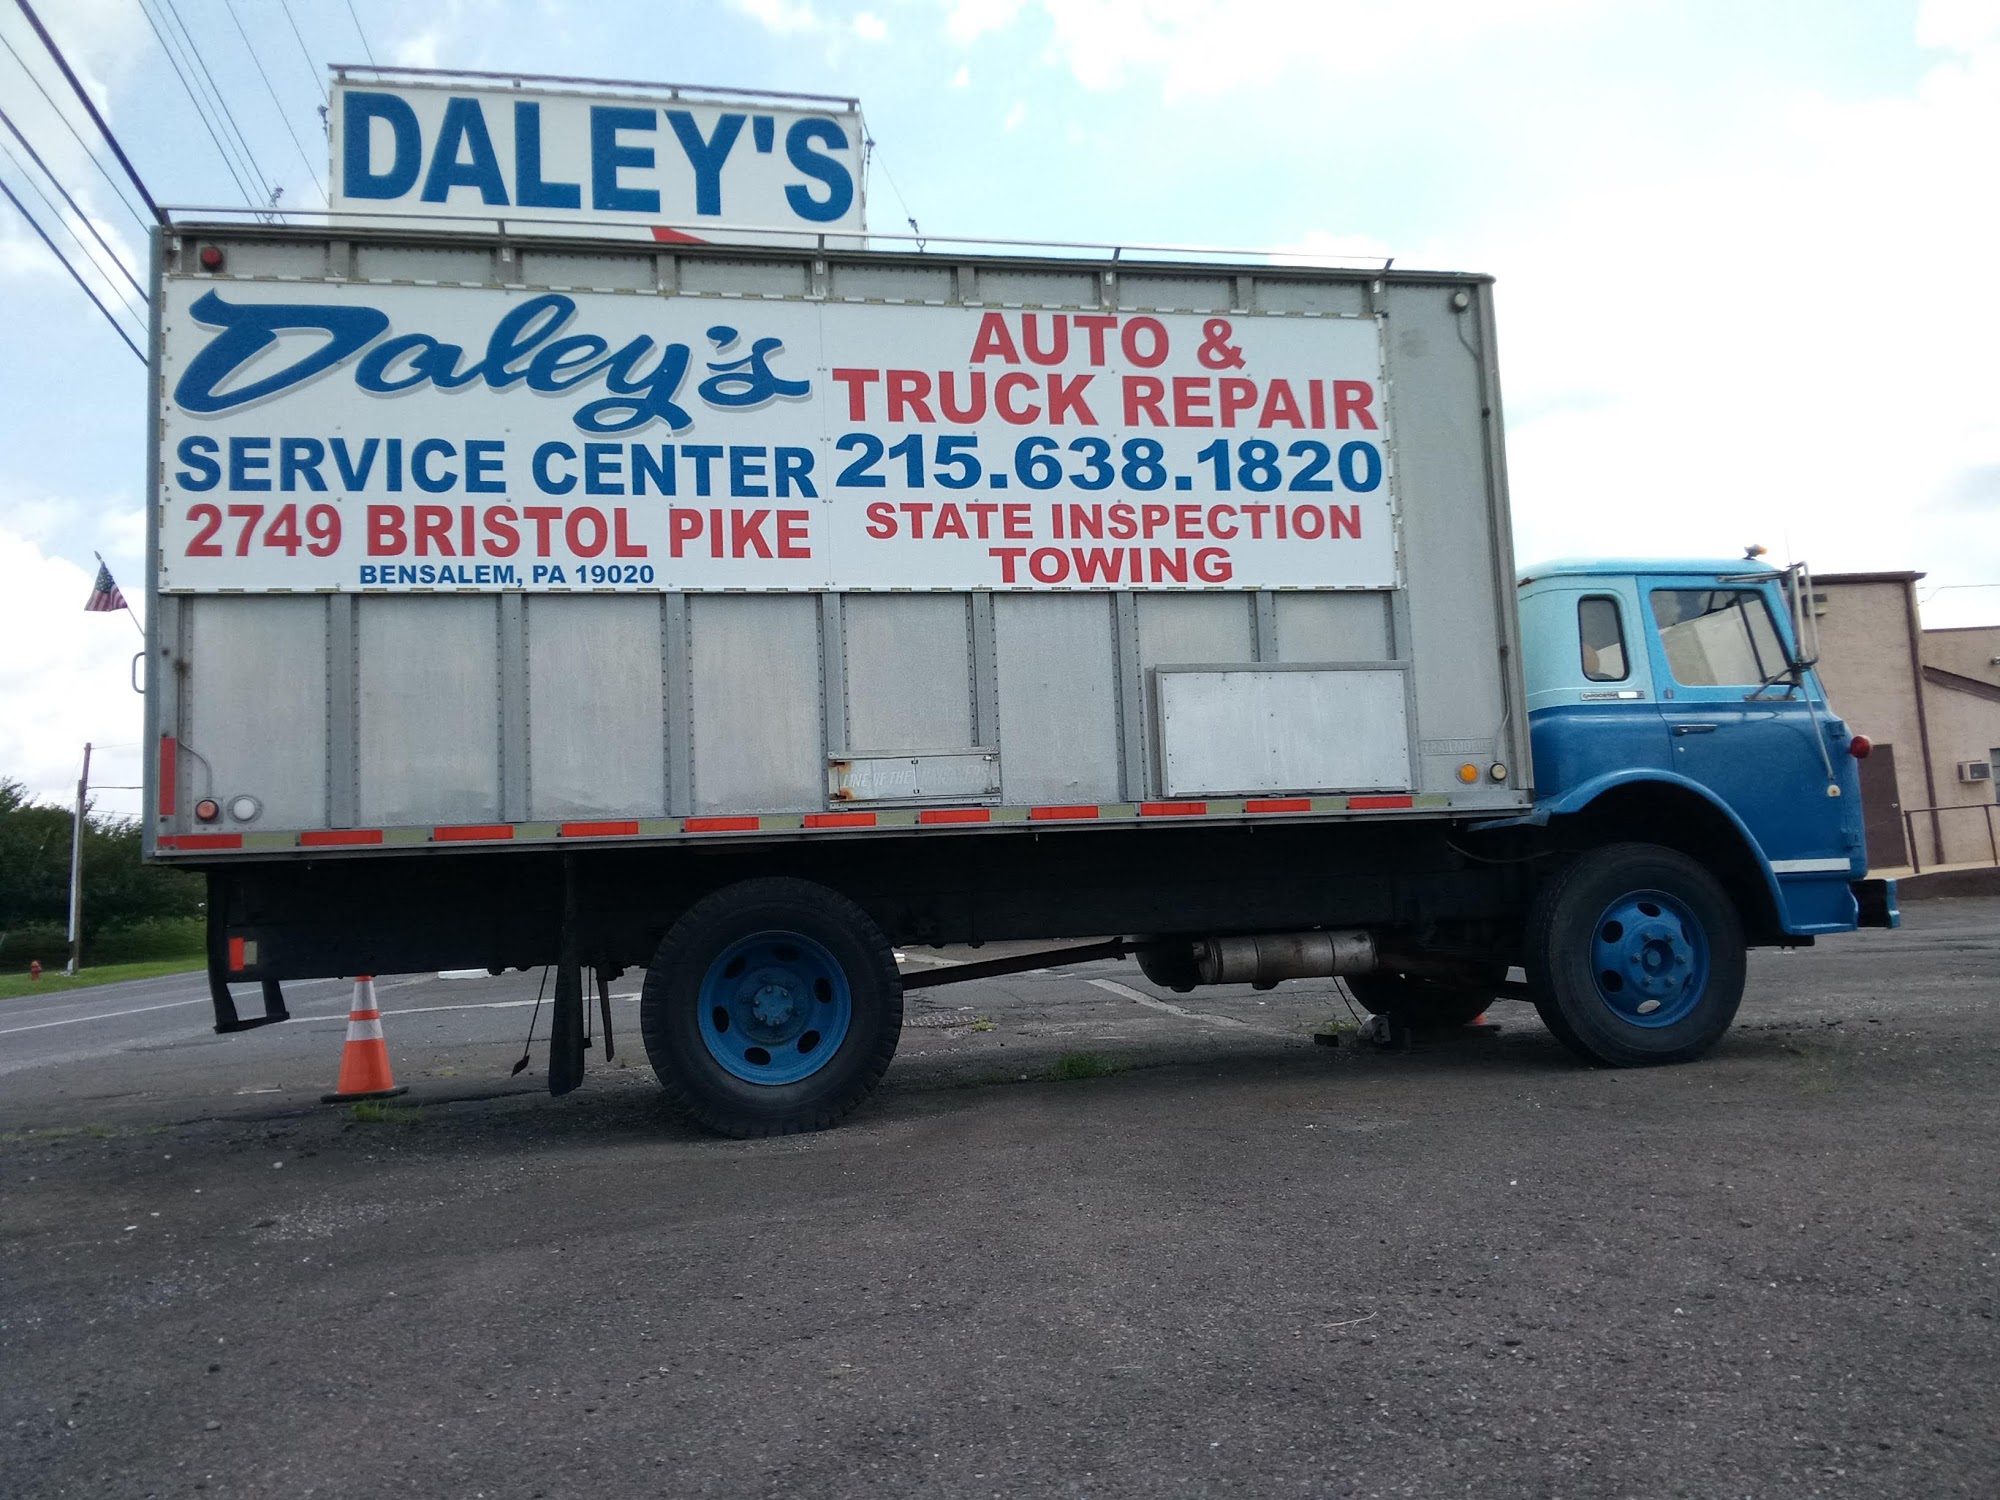 Daley's Service Center